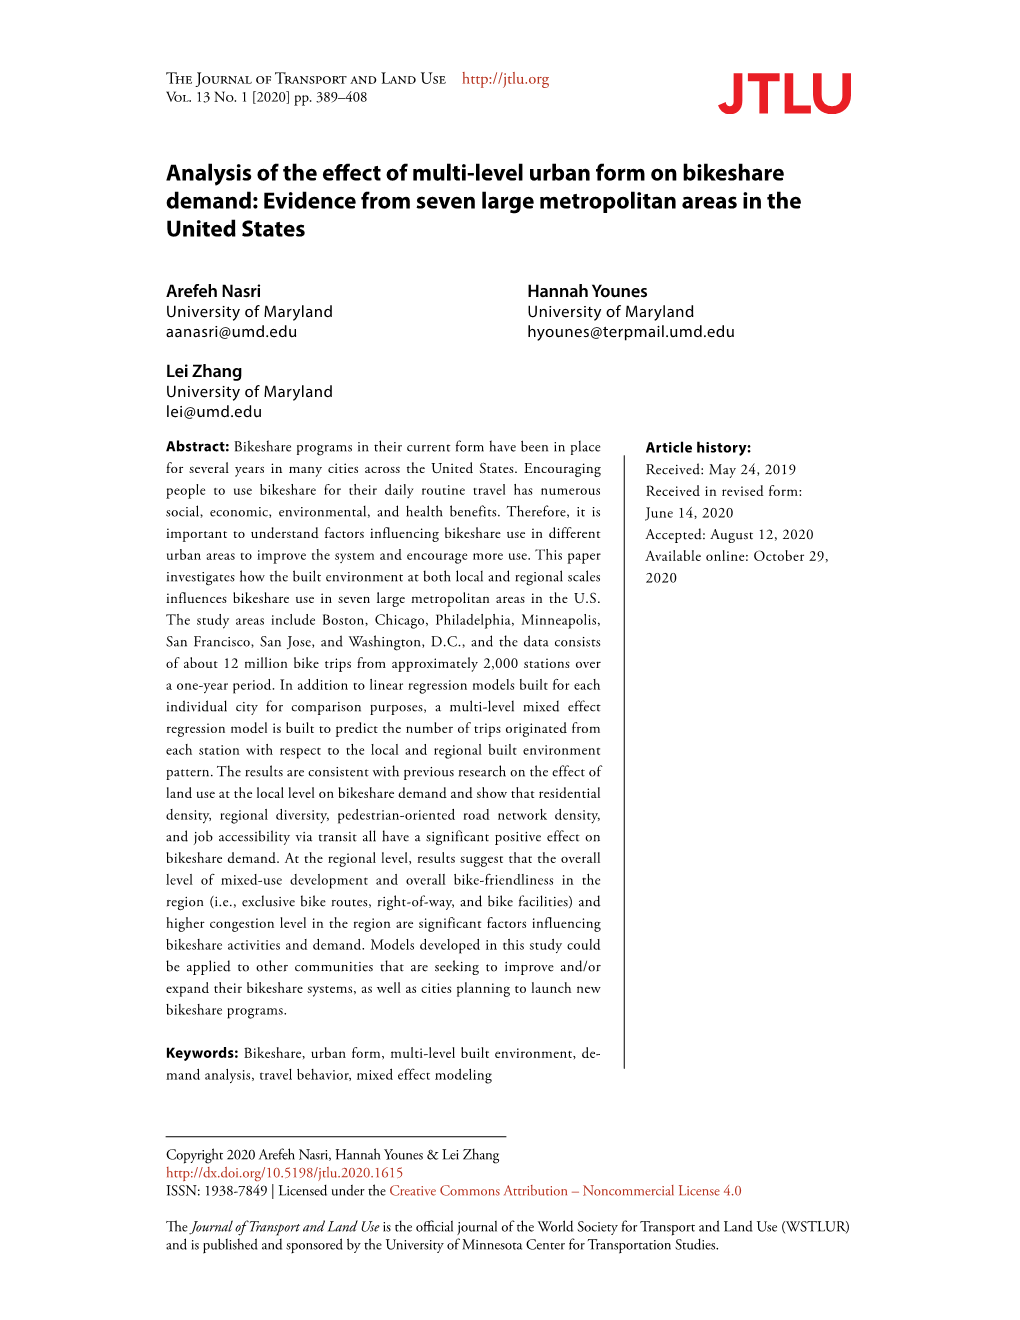 Analysis of the Effect of Multi-Level Urban Form on Bikeshare Demand: Evidence from Seven Large Metropolitan Areas in the United States